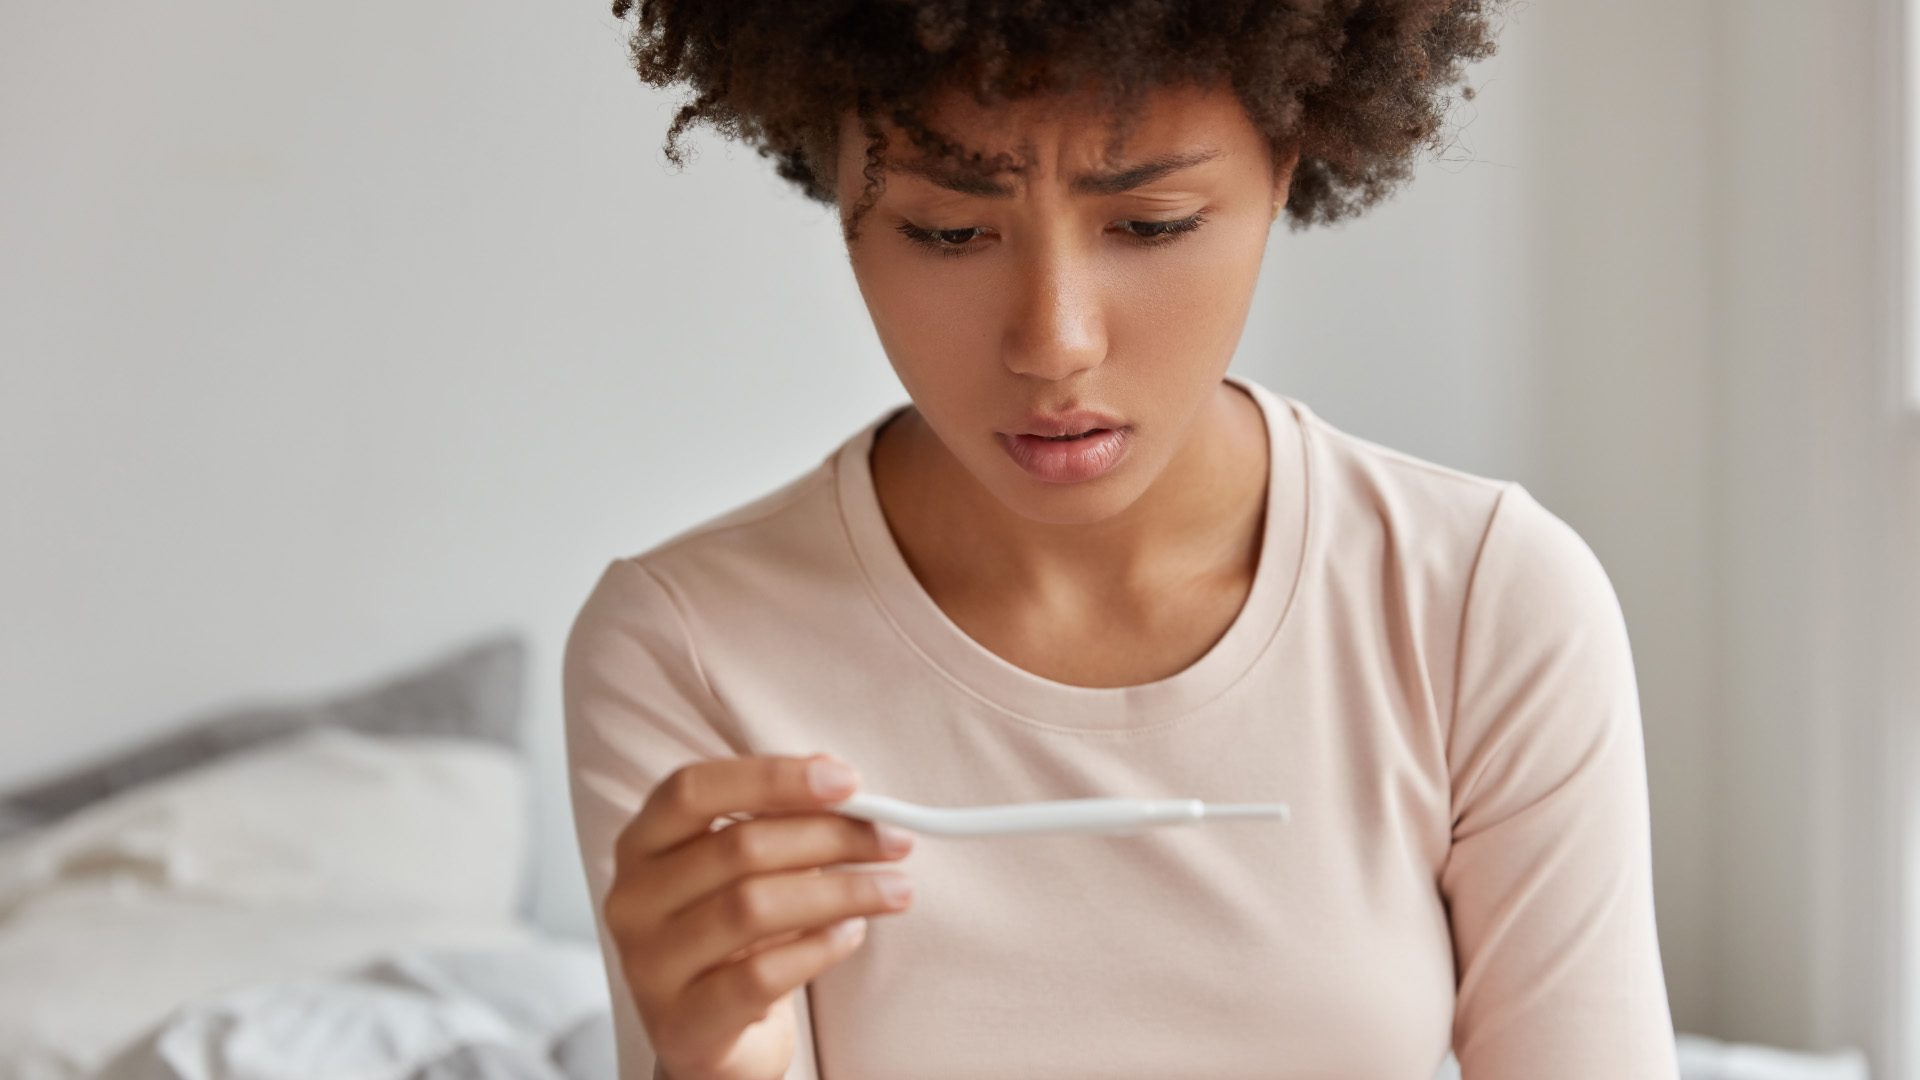 Secondary infertility: What is it and what’s the <br>difference between infertility and secondary infertility?